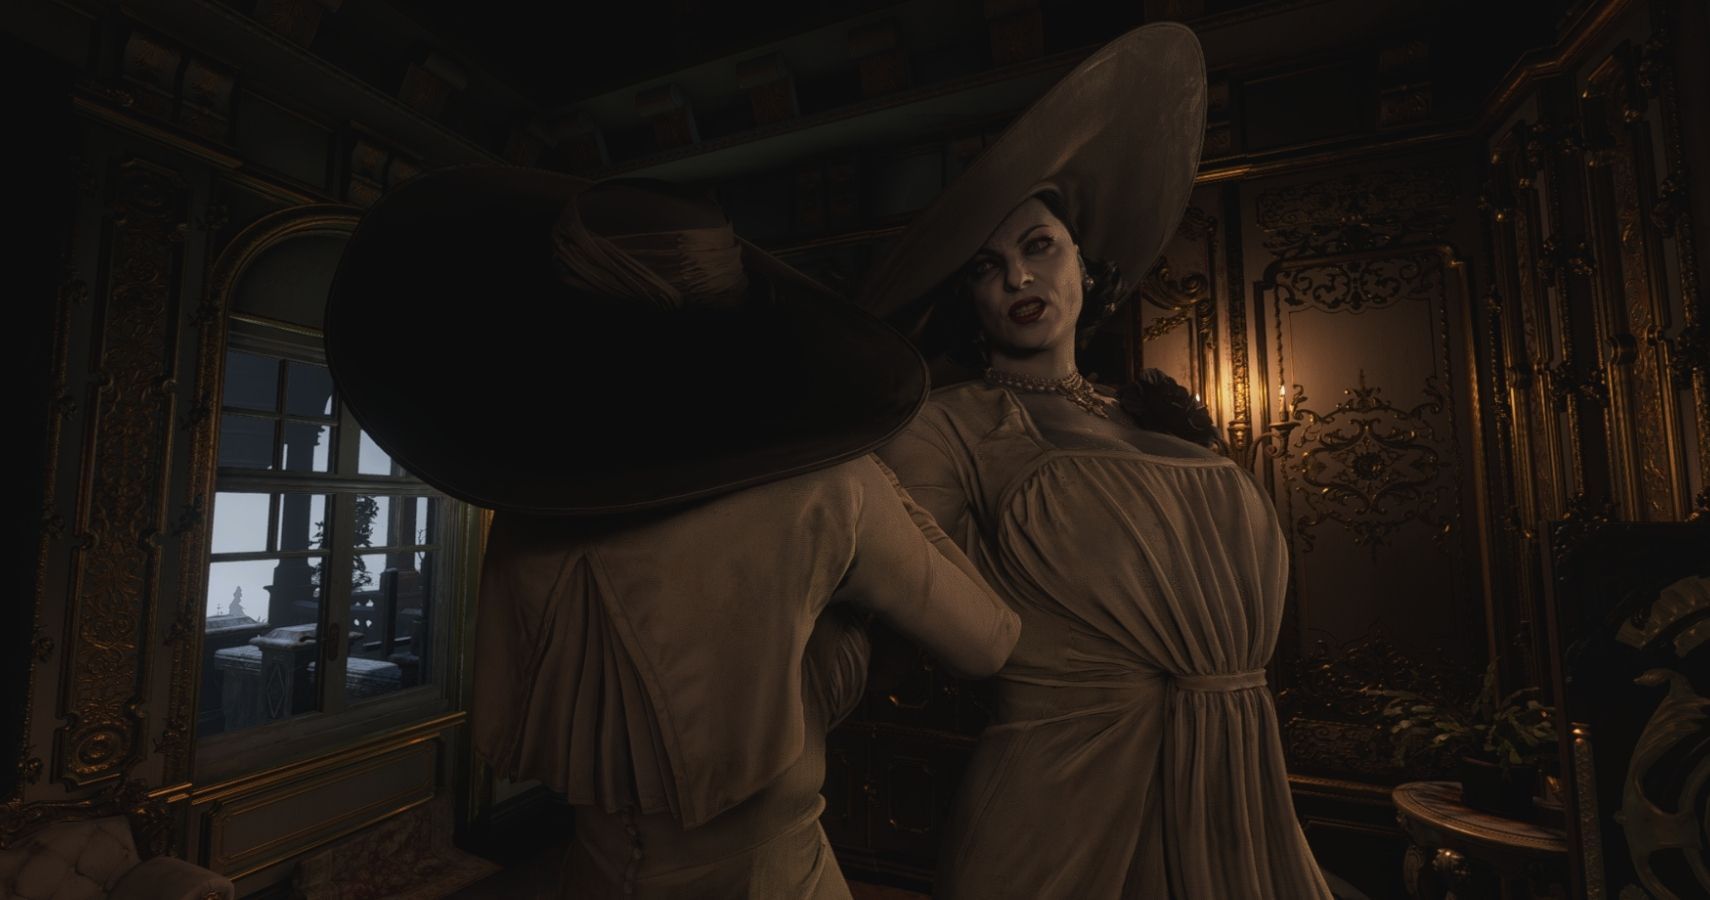 The ordinary Lady Dimitrescu has captured the modded, player controlled Lady Dimitrescu